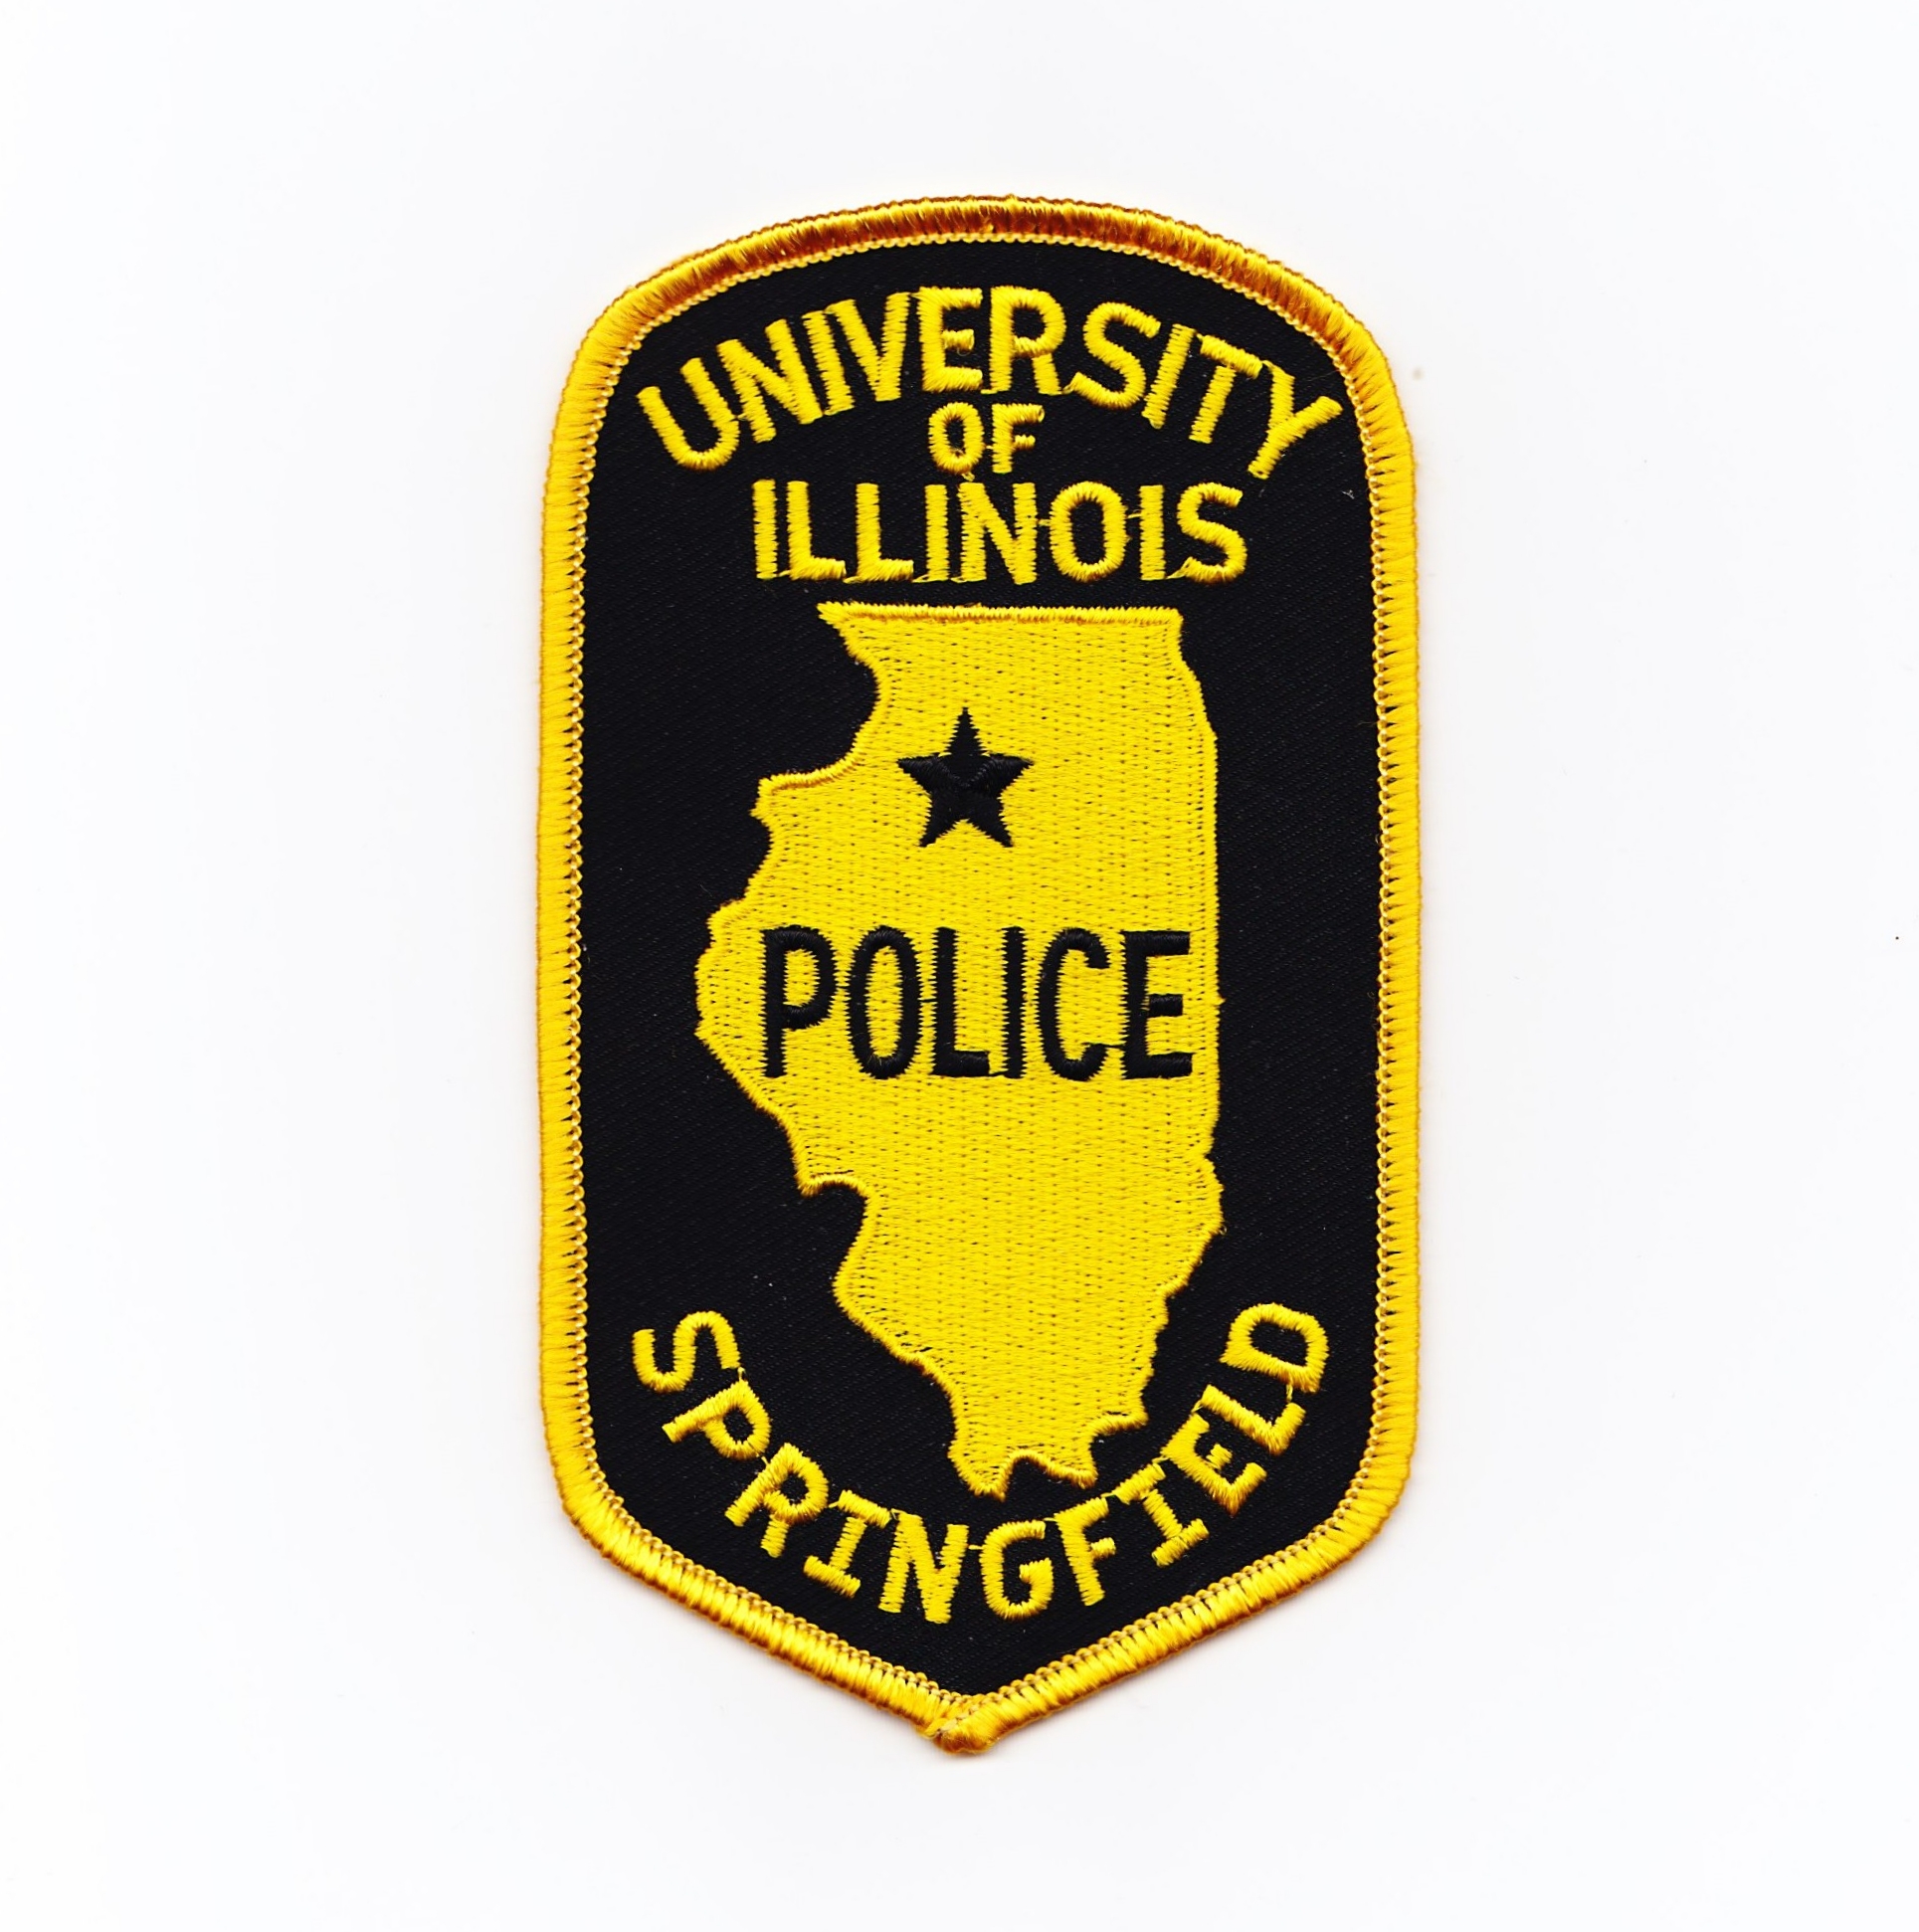 IL - University of Illinois at Springfield Police Department